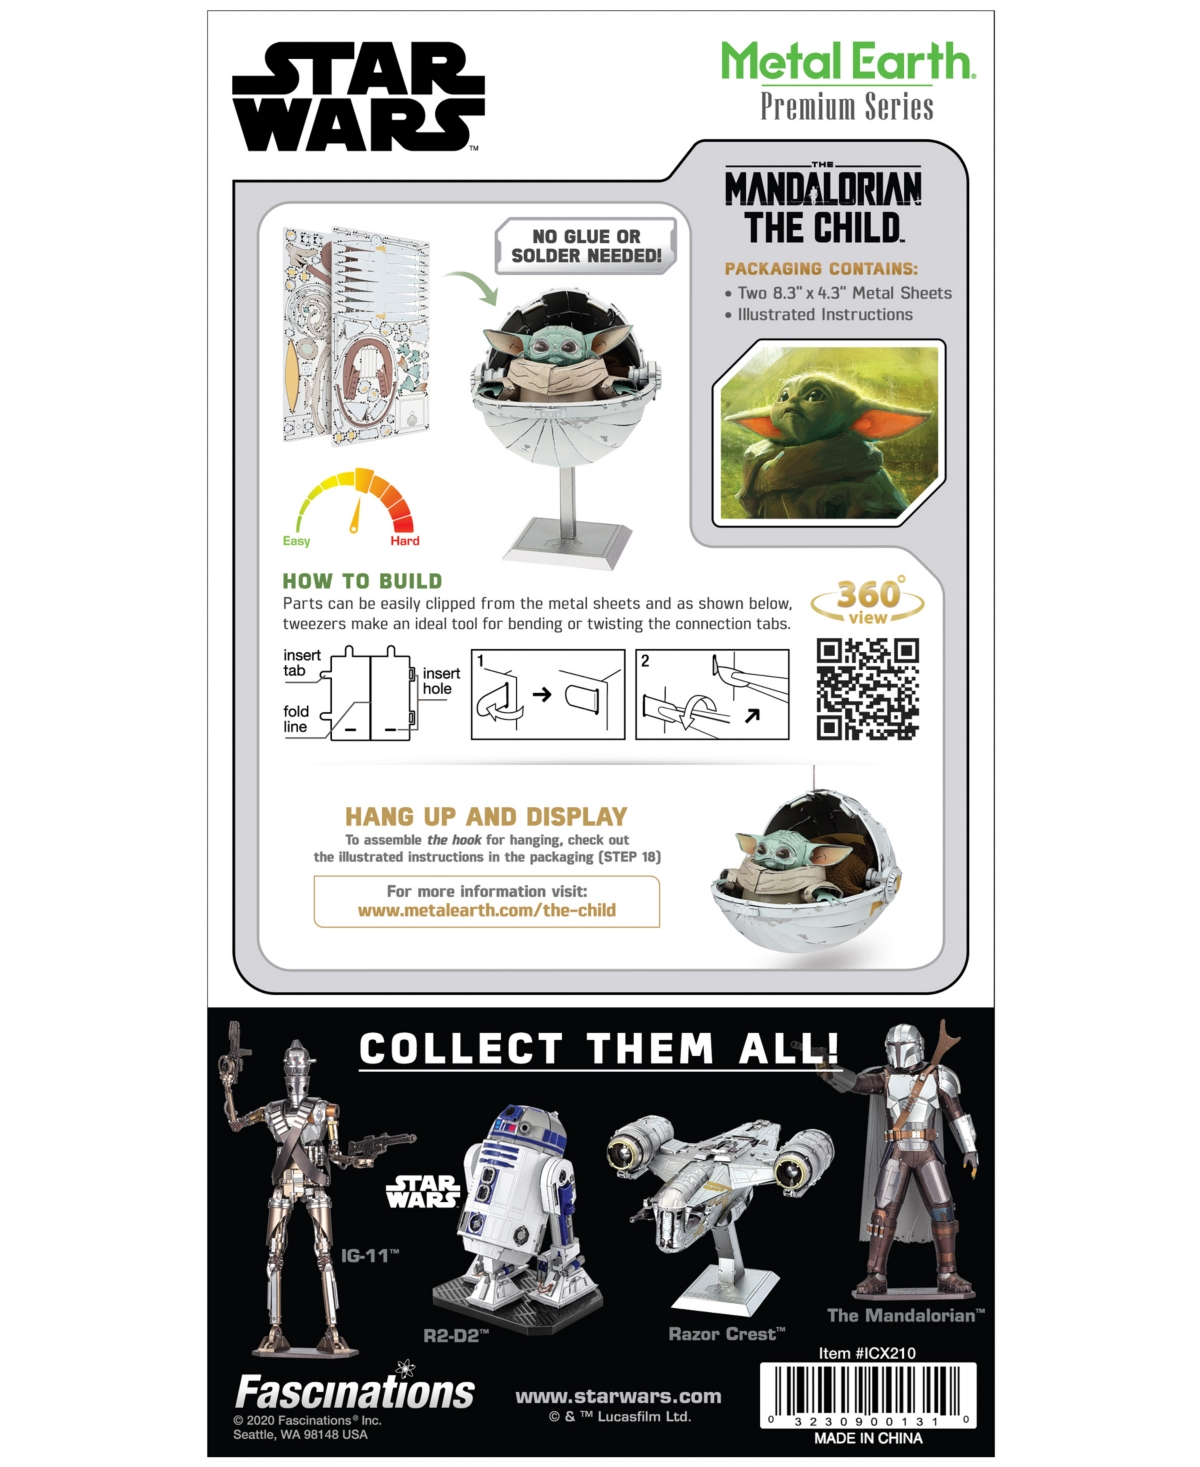 Shop University Games Fascinations Metal Earth Premium Series Iconx 3d Metal Model Kit Star Wars The Mandalorian The Child In No Color